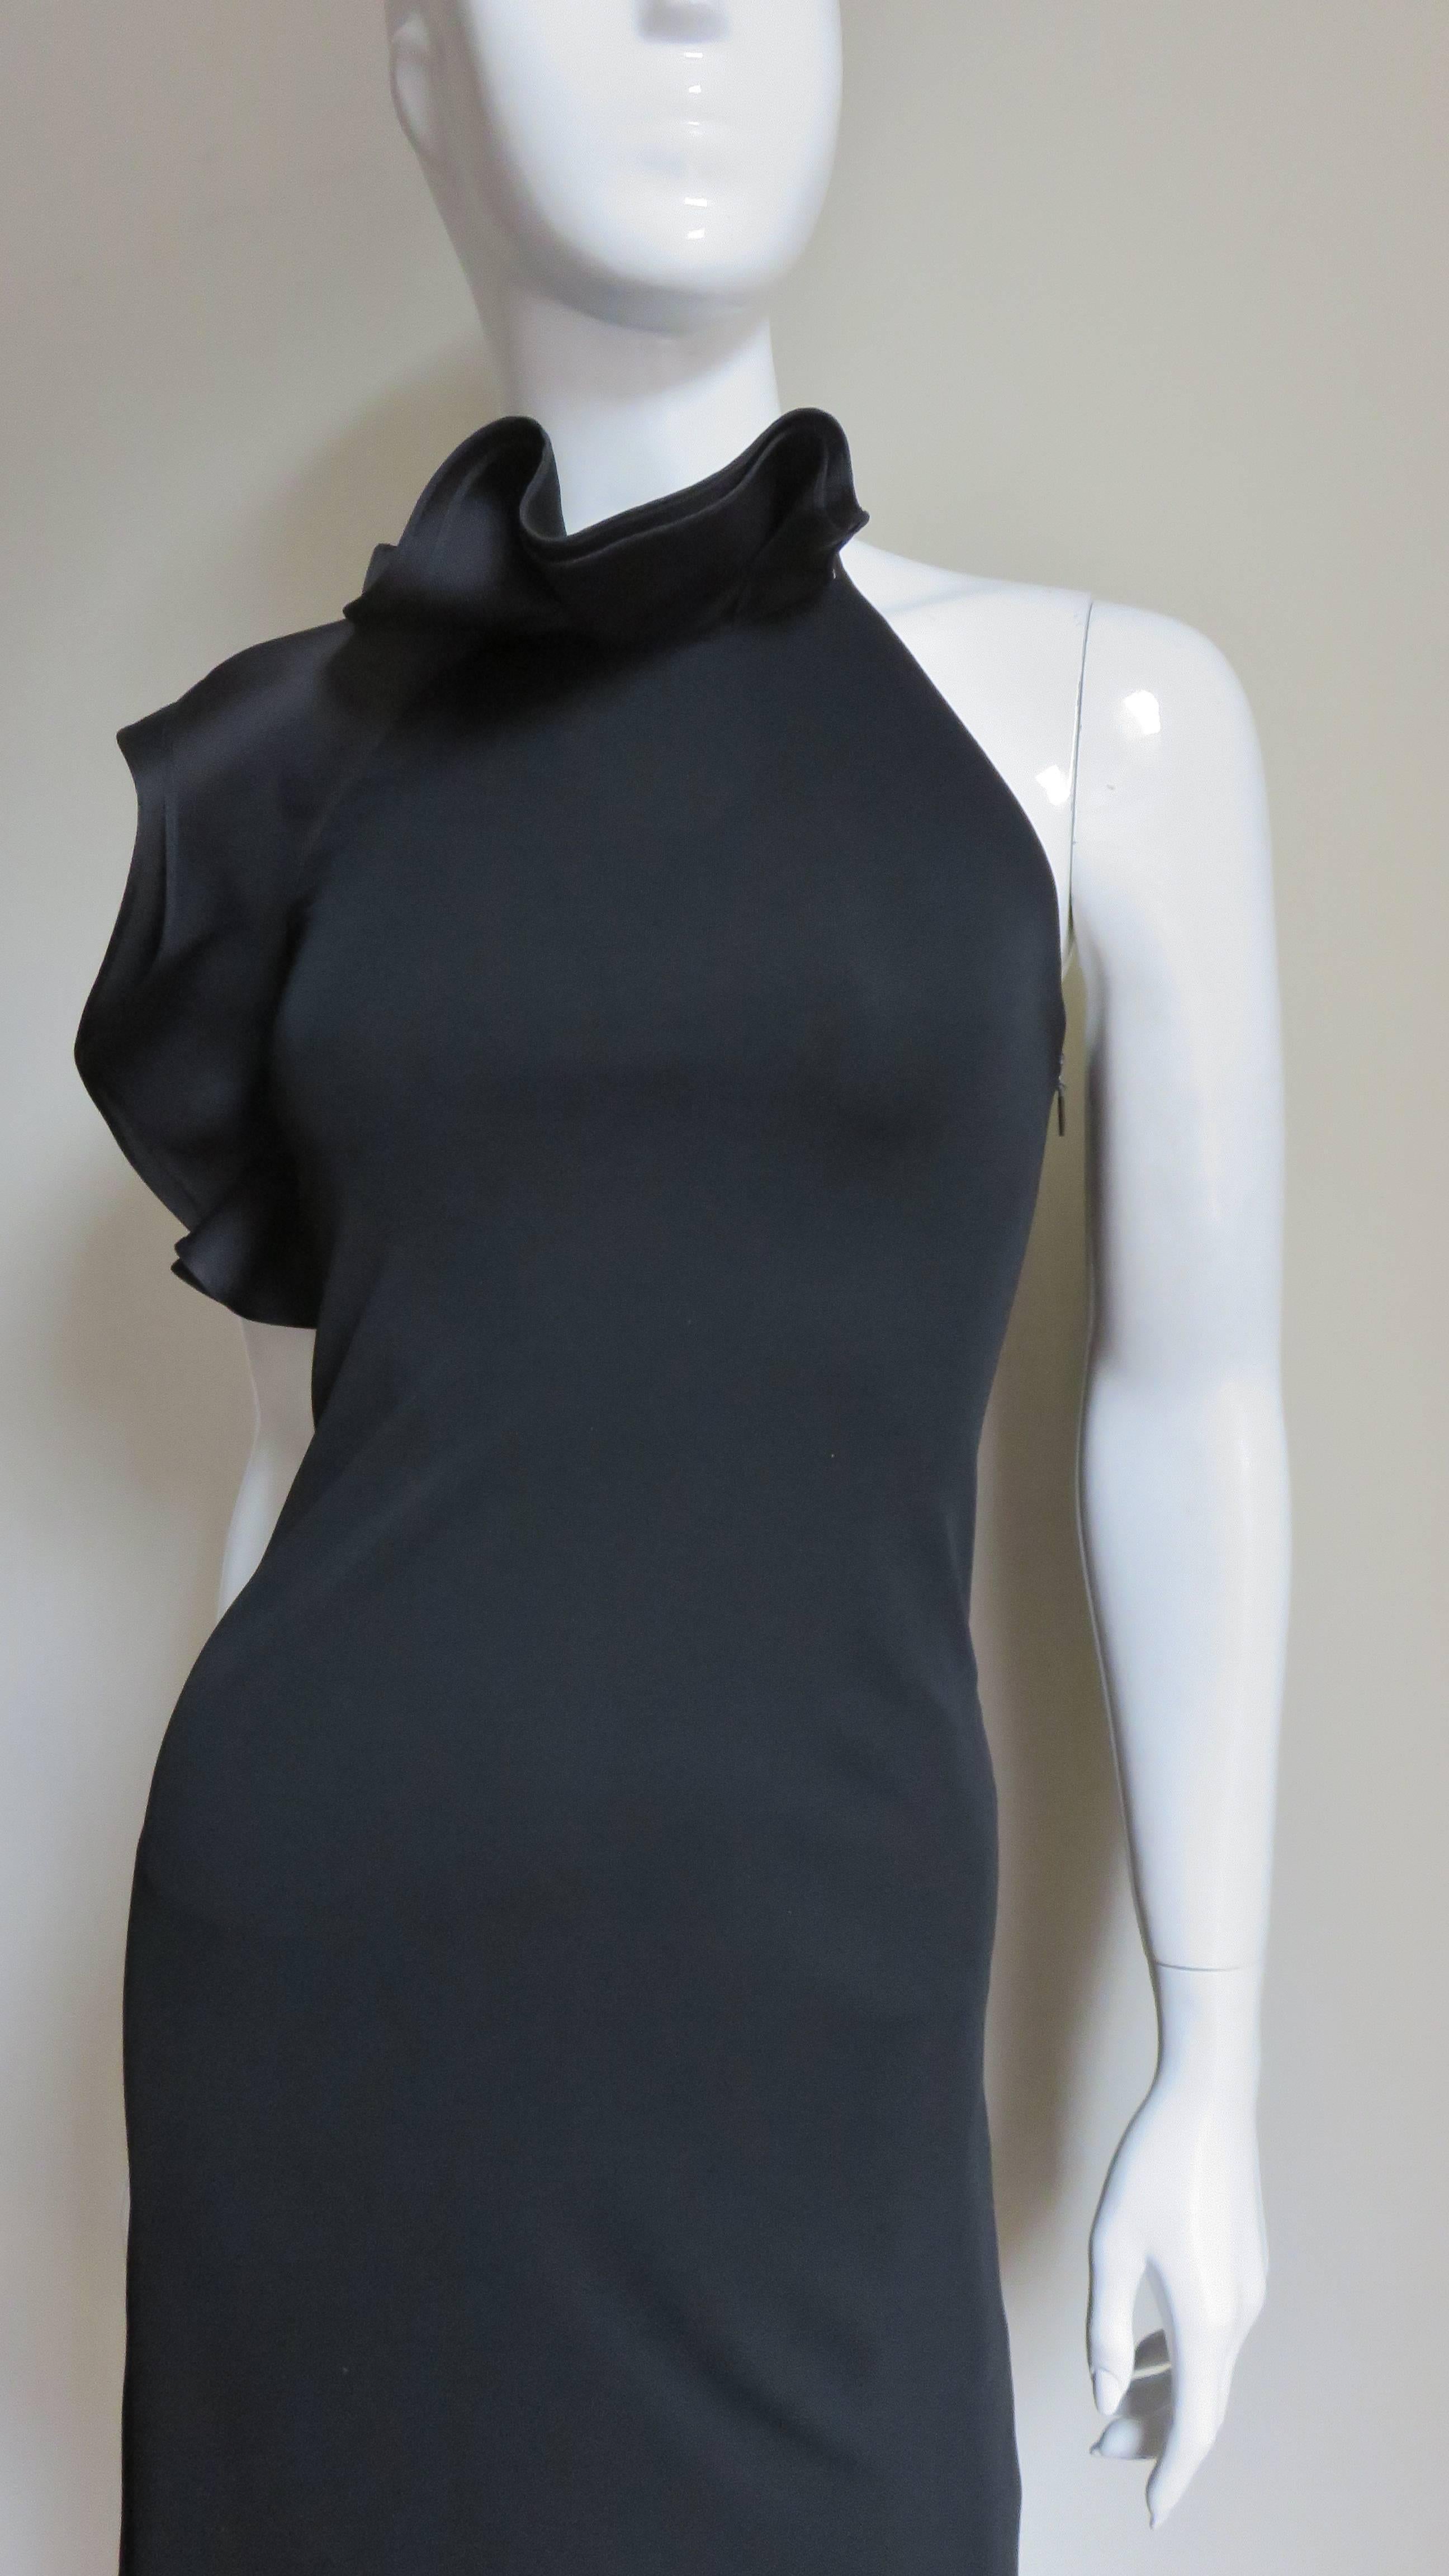 A beautiful black silk jersey halter dress by Gucci.  It is a simple body skimming mini dress with a  fabulous silk organza ruffle stand up collar in the front across the neck down the side to above the waist.  A strap closes at the back neck with a